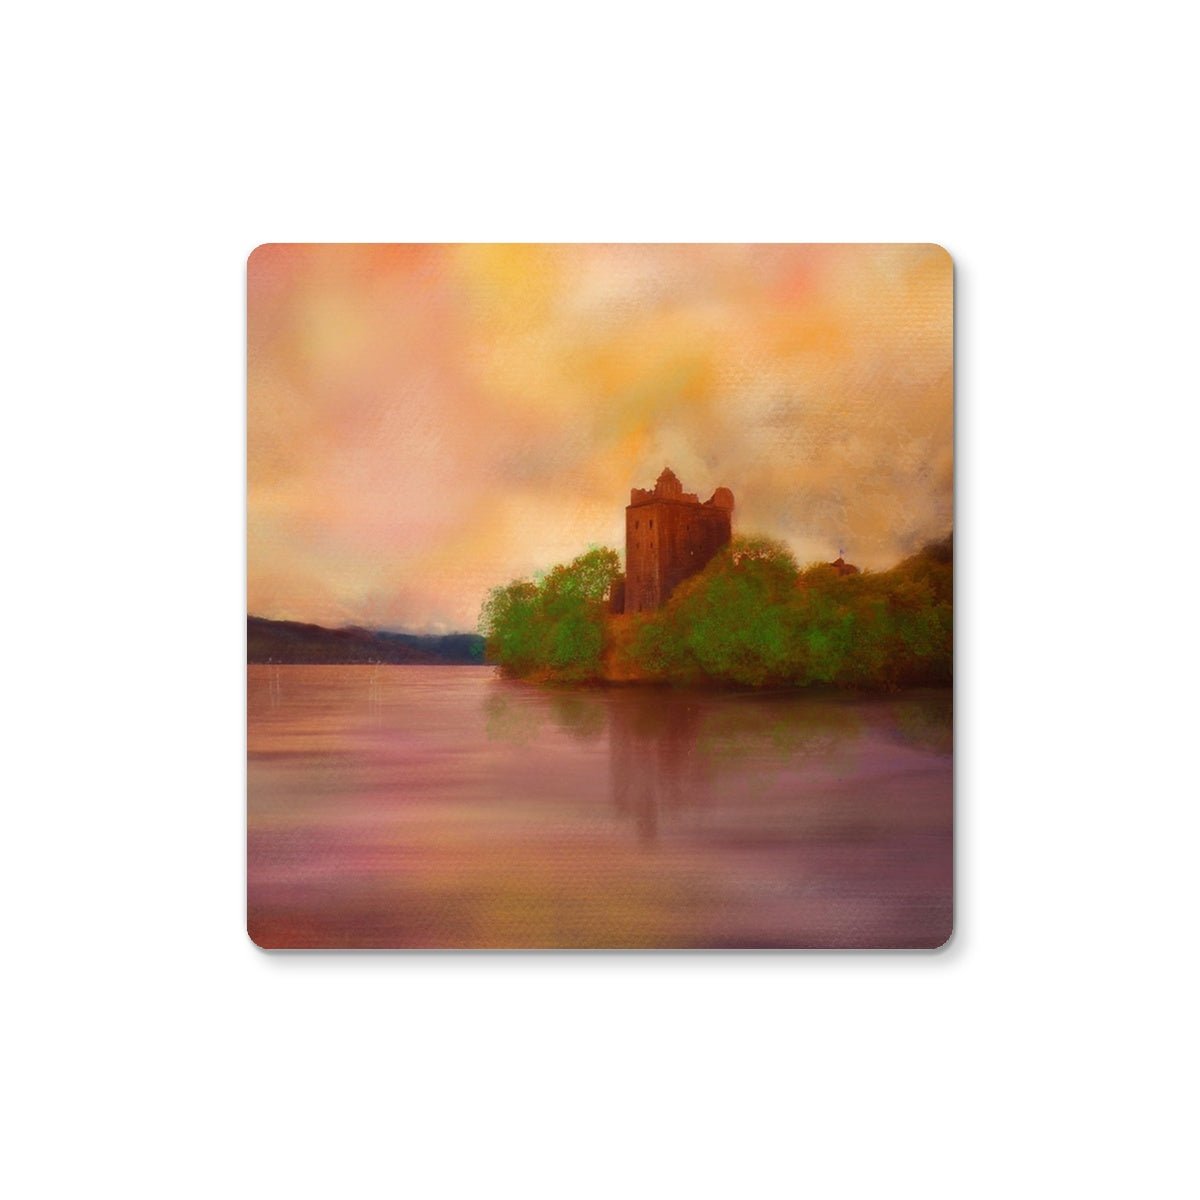 Urquhart Castle Art Gifts Coaster-Coasters-Scottish Castles Art Gallery-2 Coasters-Paintings, Prints, Homeware, Art Gifts From Scotland By Scottish Artist Kevin Hunter